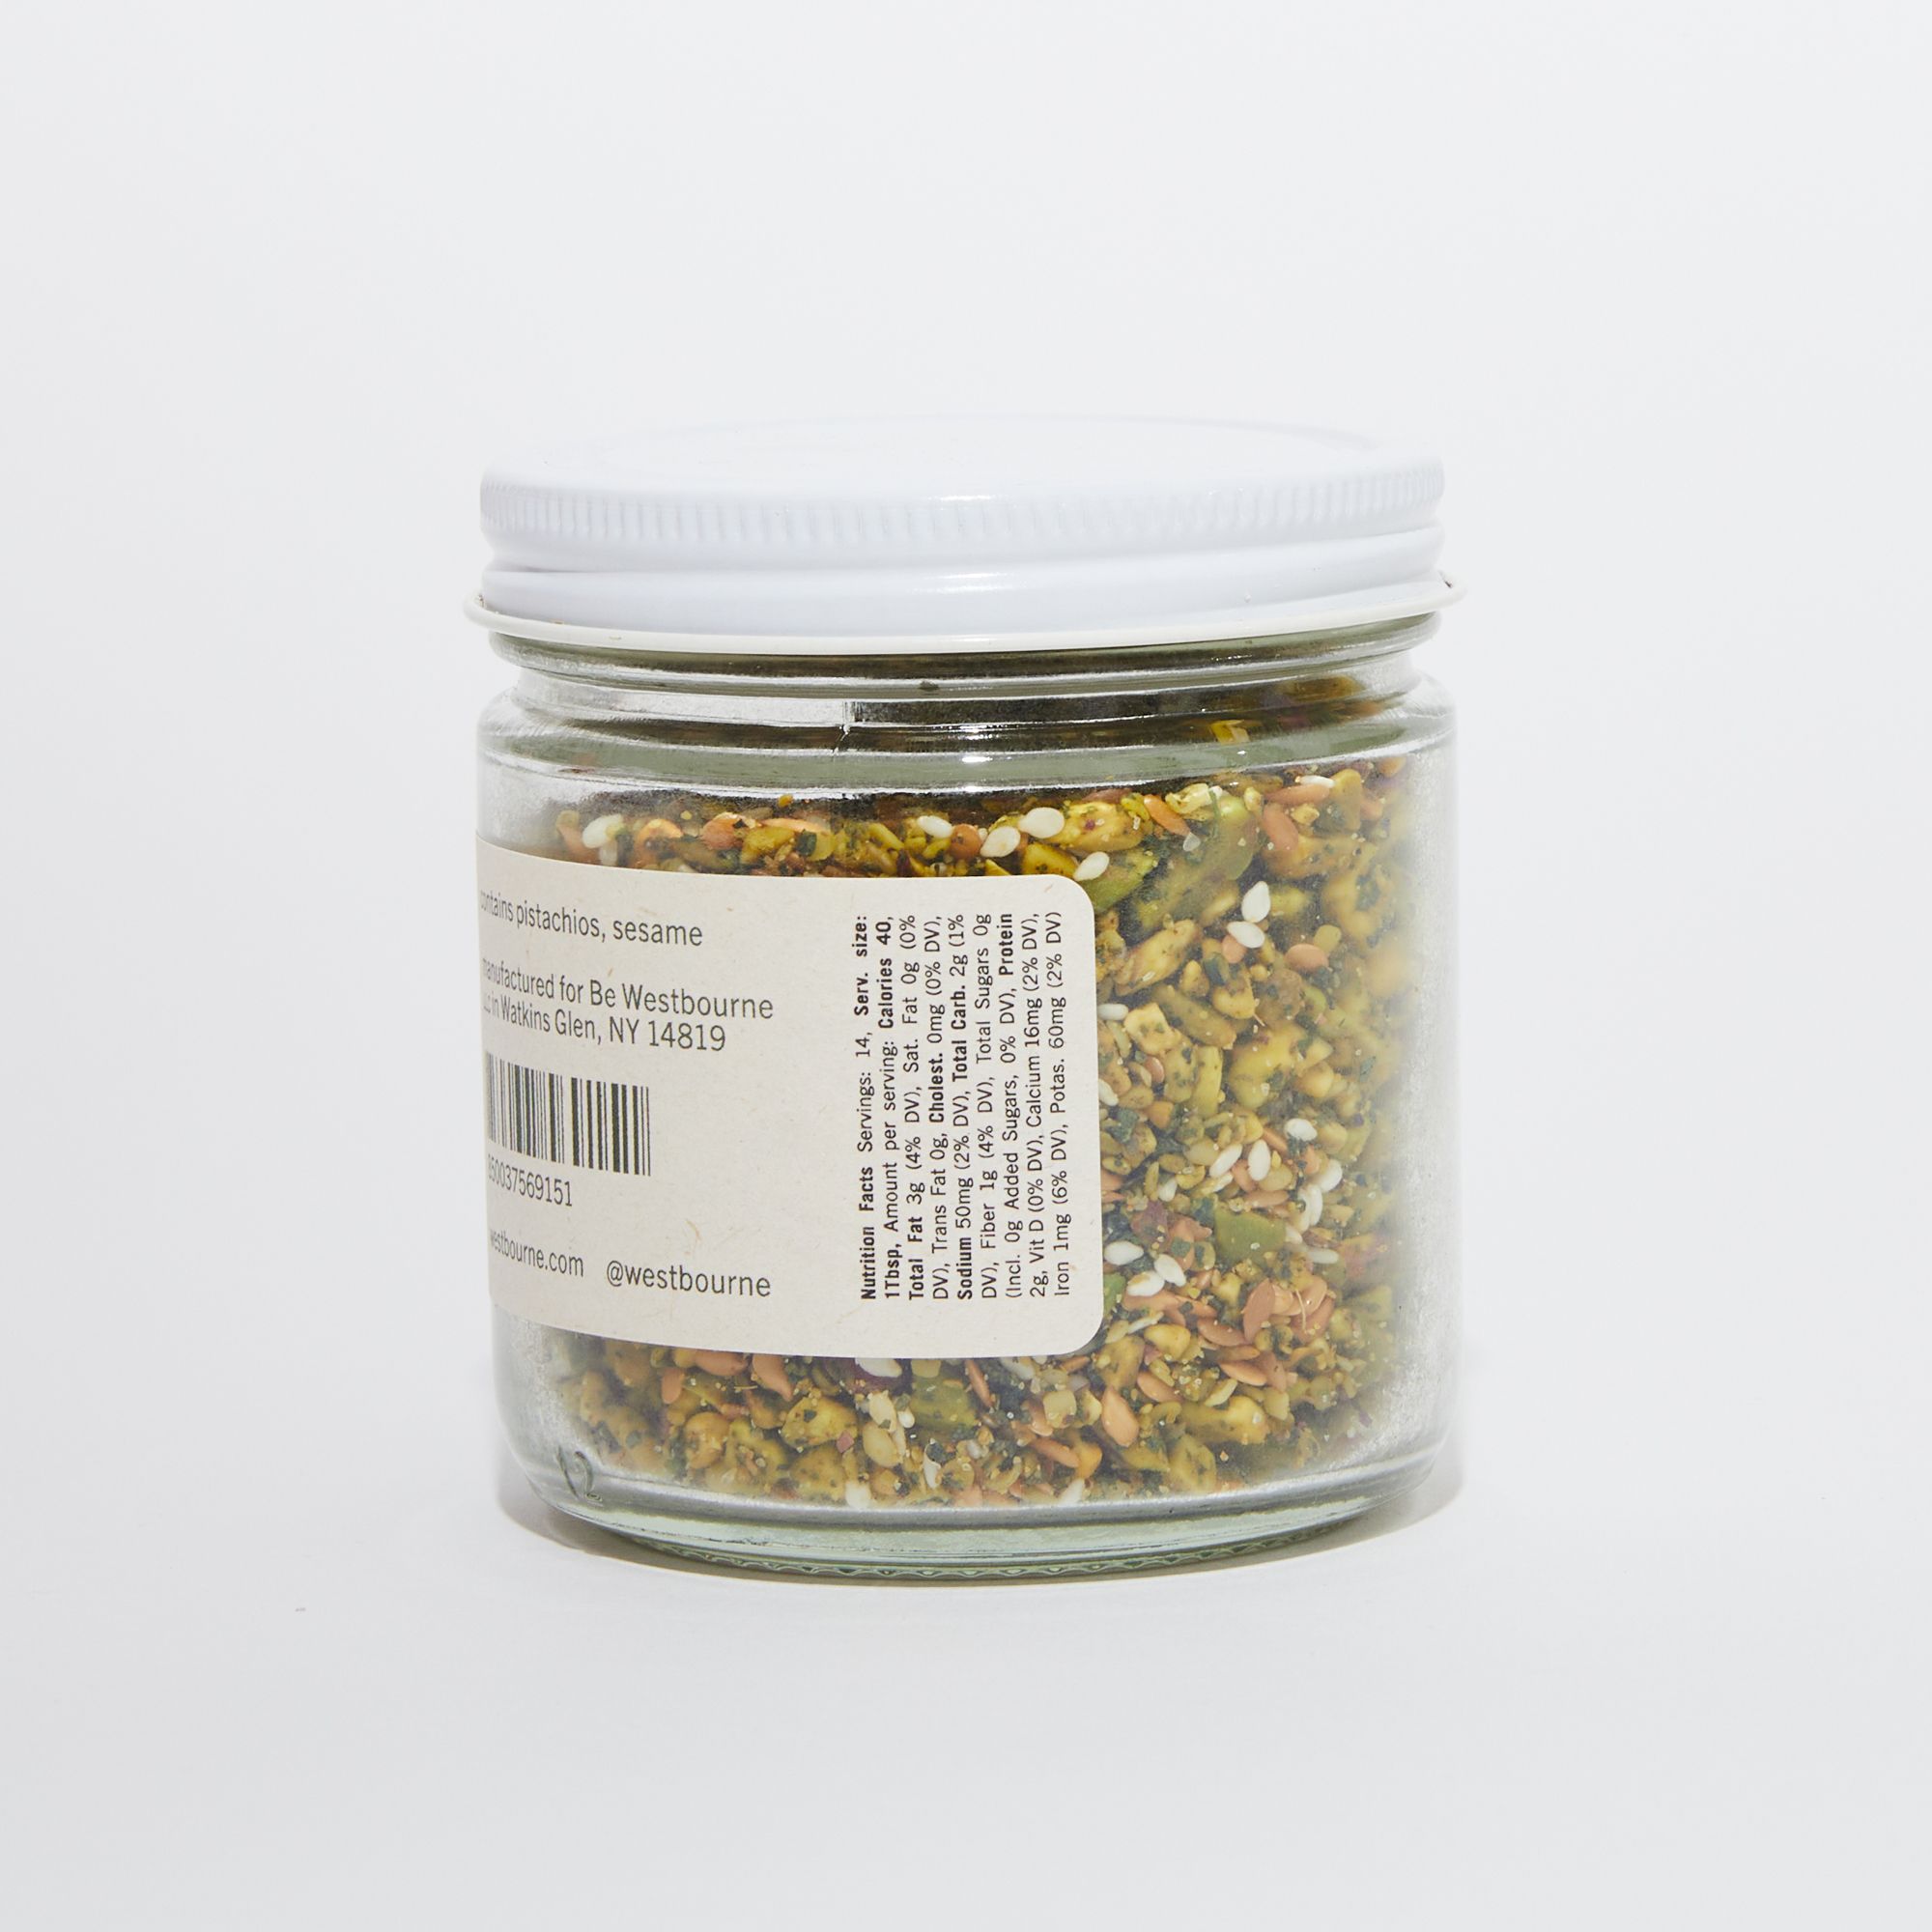 Clear jar of pistachio dukkah with a white lid featuring nutritional facts